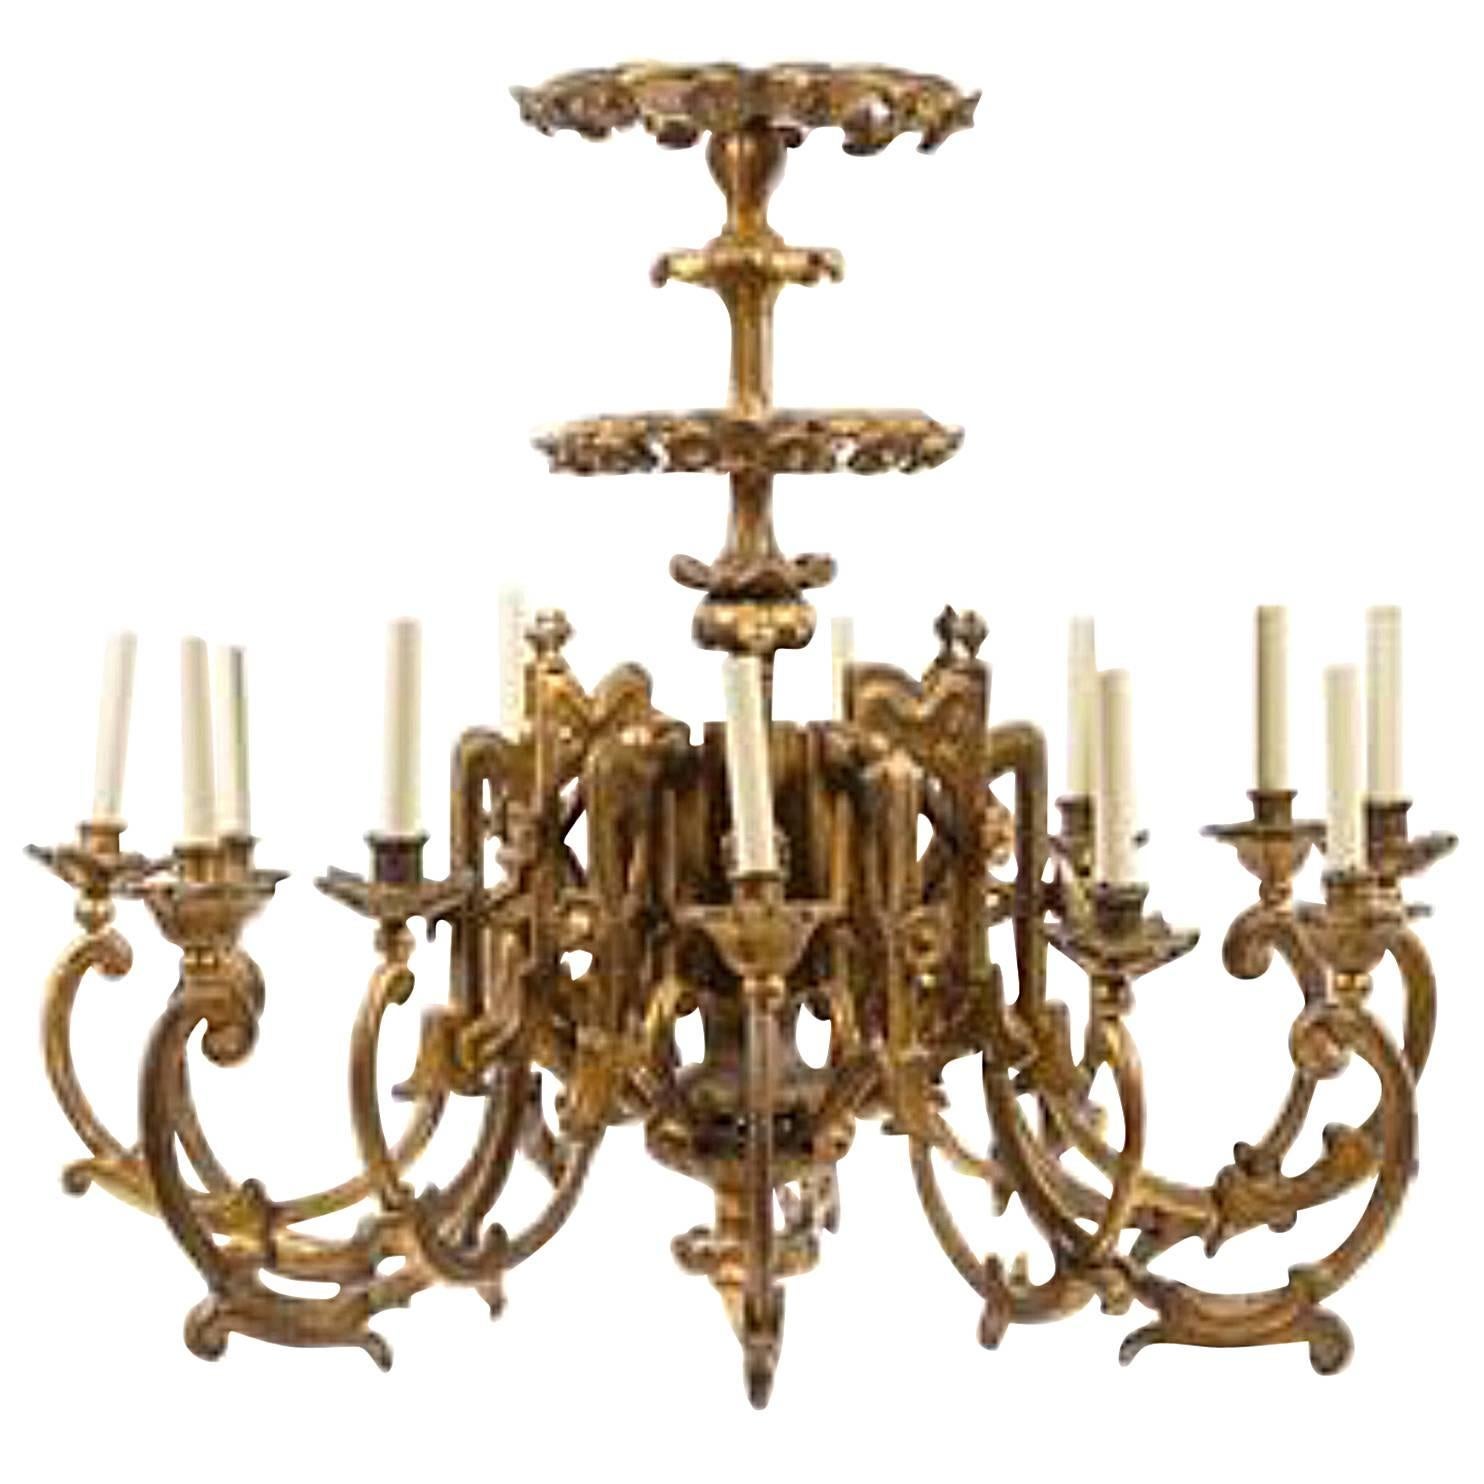 Exceptional Pair of 19th Century English Giltwood Twelve-Light Chandeliers